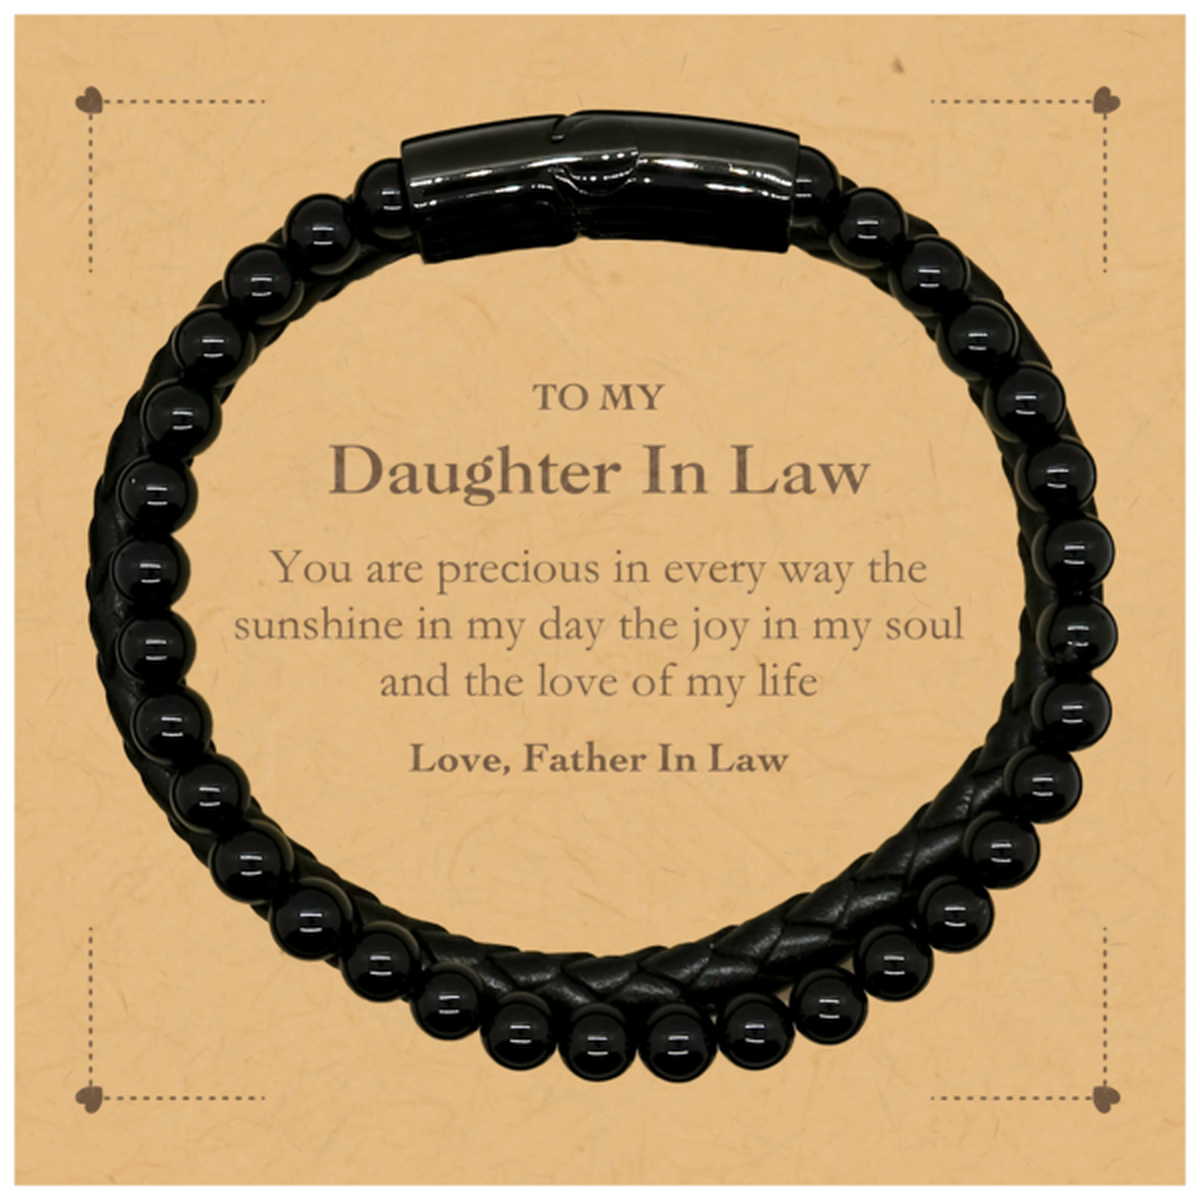 Graduation Gifts for Daughter In Law Stone Leather Bracelets Present from Father In Law, Christmas Daughter In Law Birthday Gifts Daughter In Law You are precious in every way the sunshine in my day. Love, Father In Law